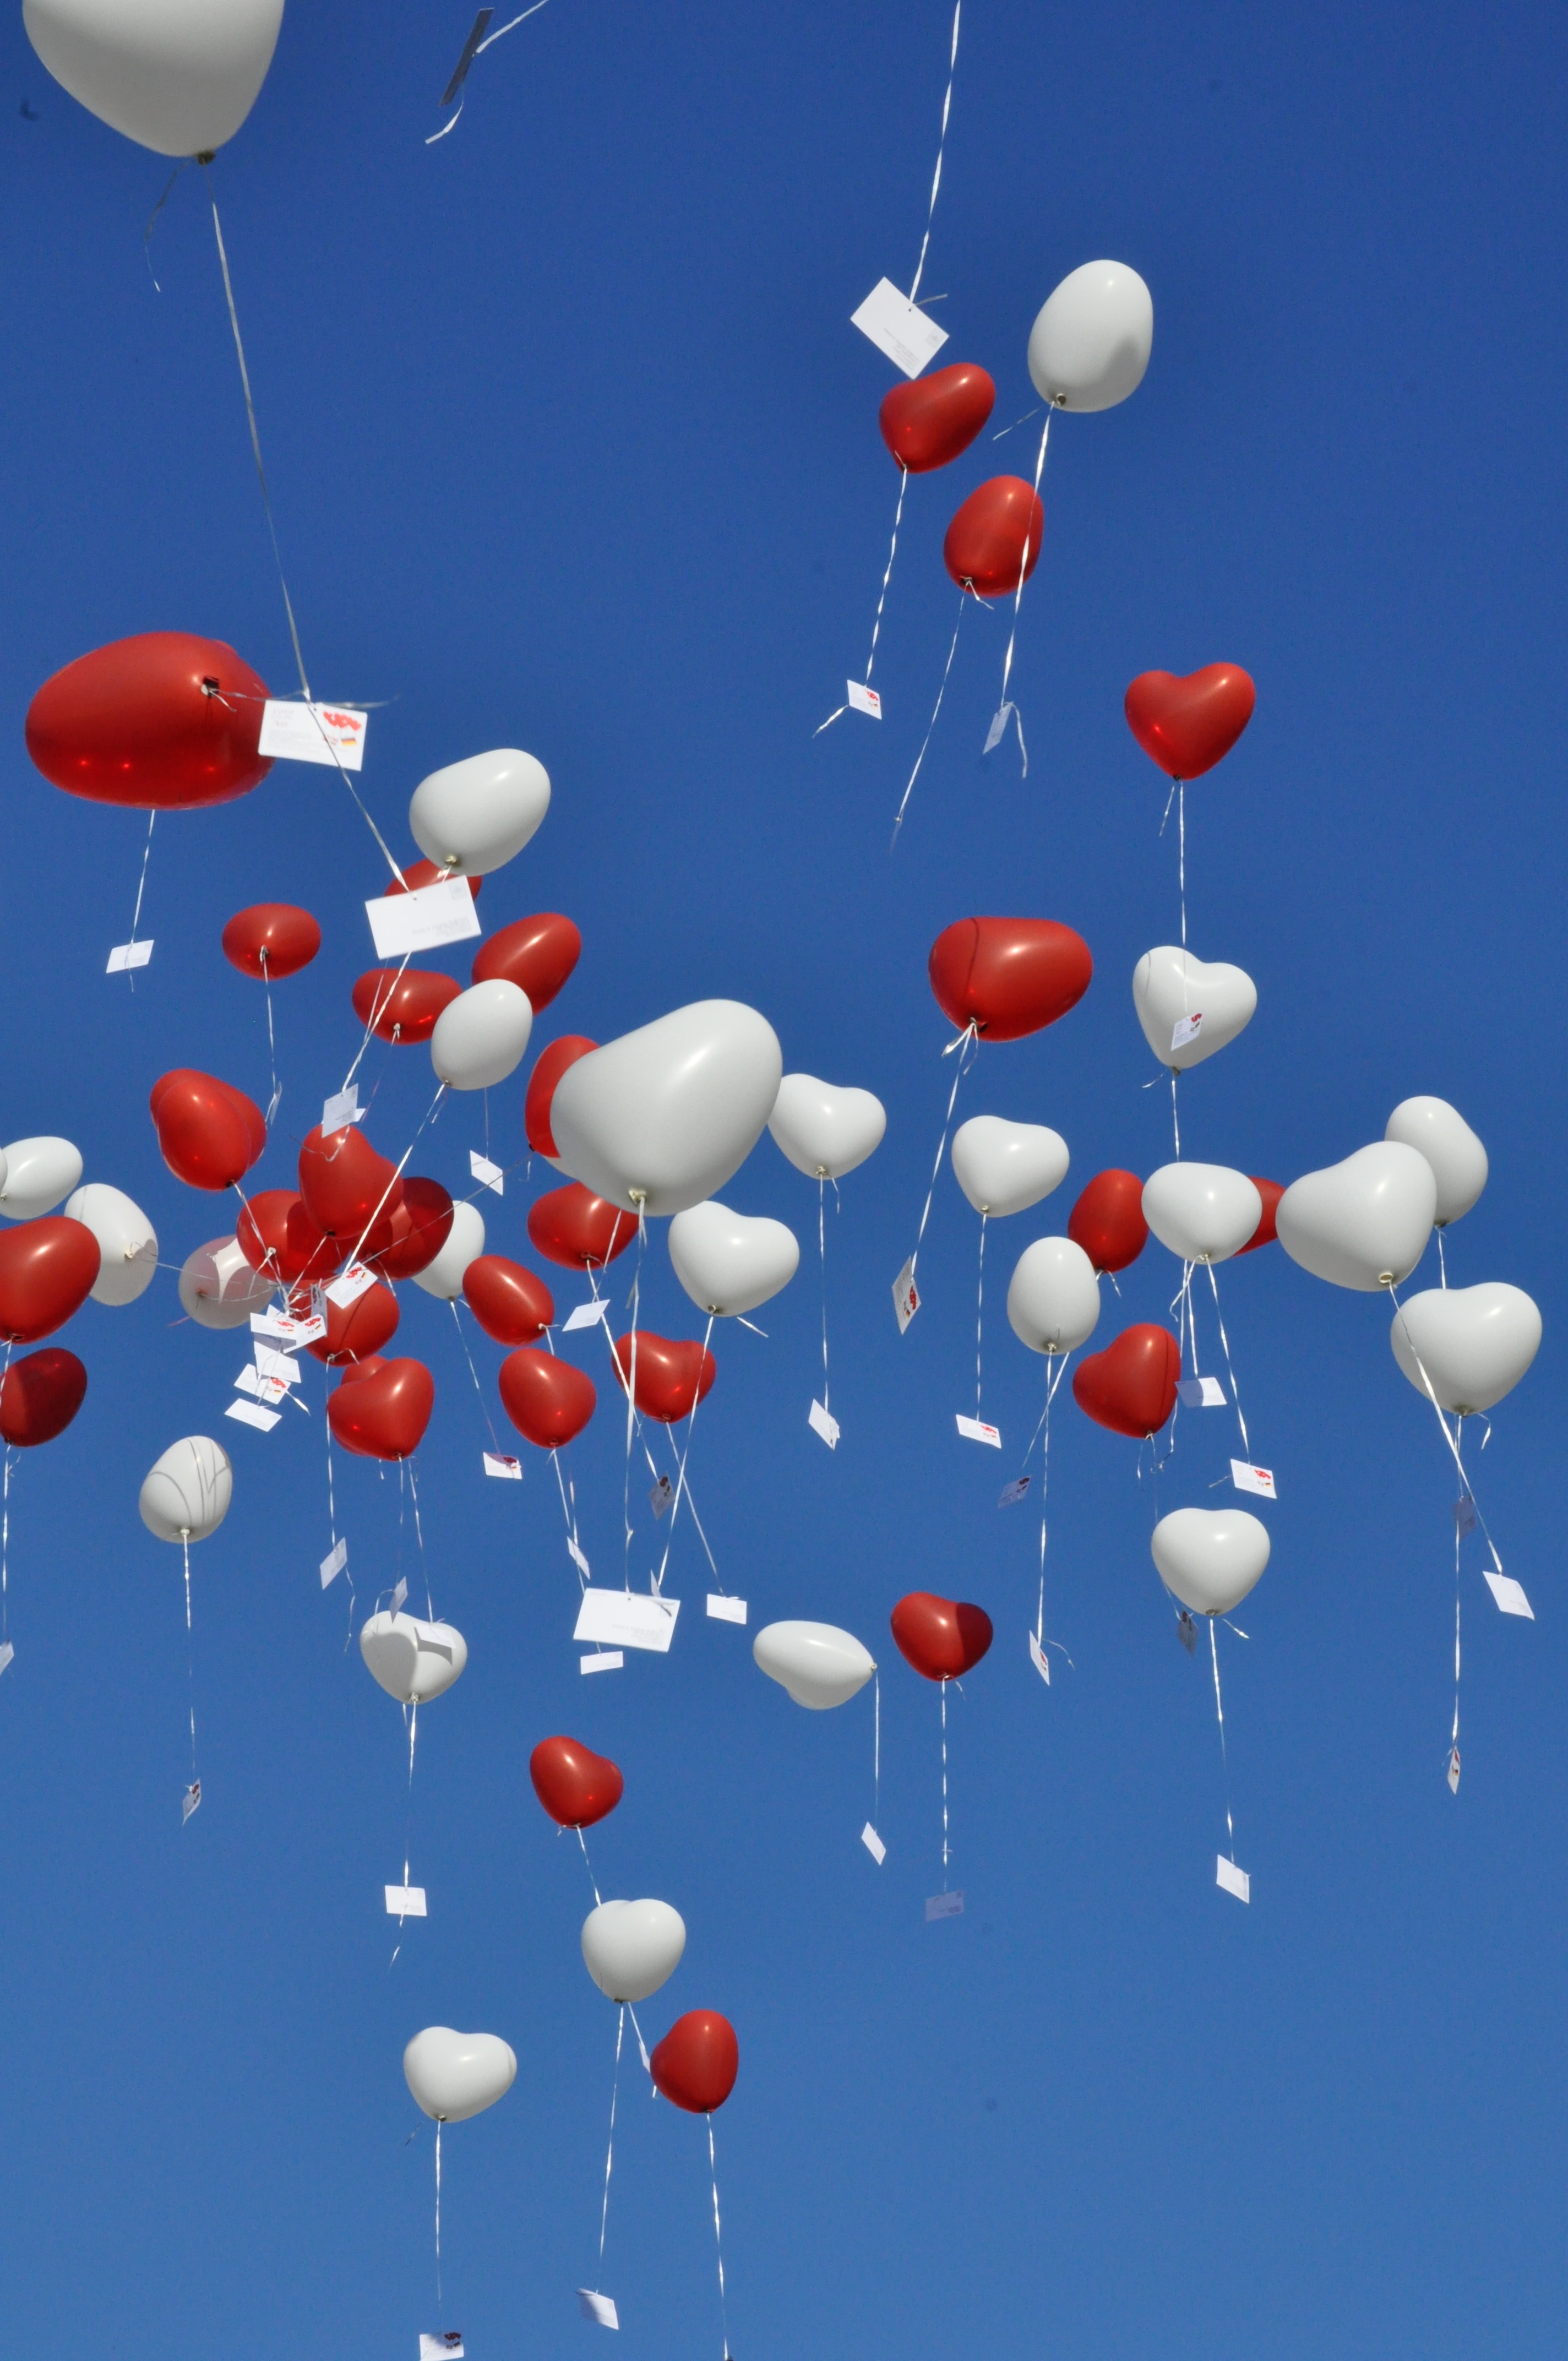 white and heart shaped balloons flew in daytime